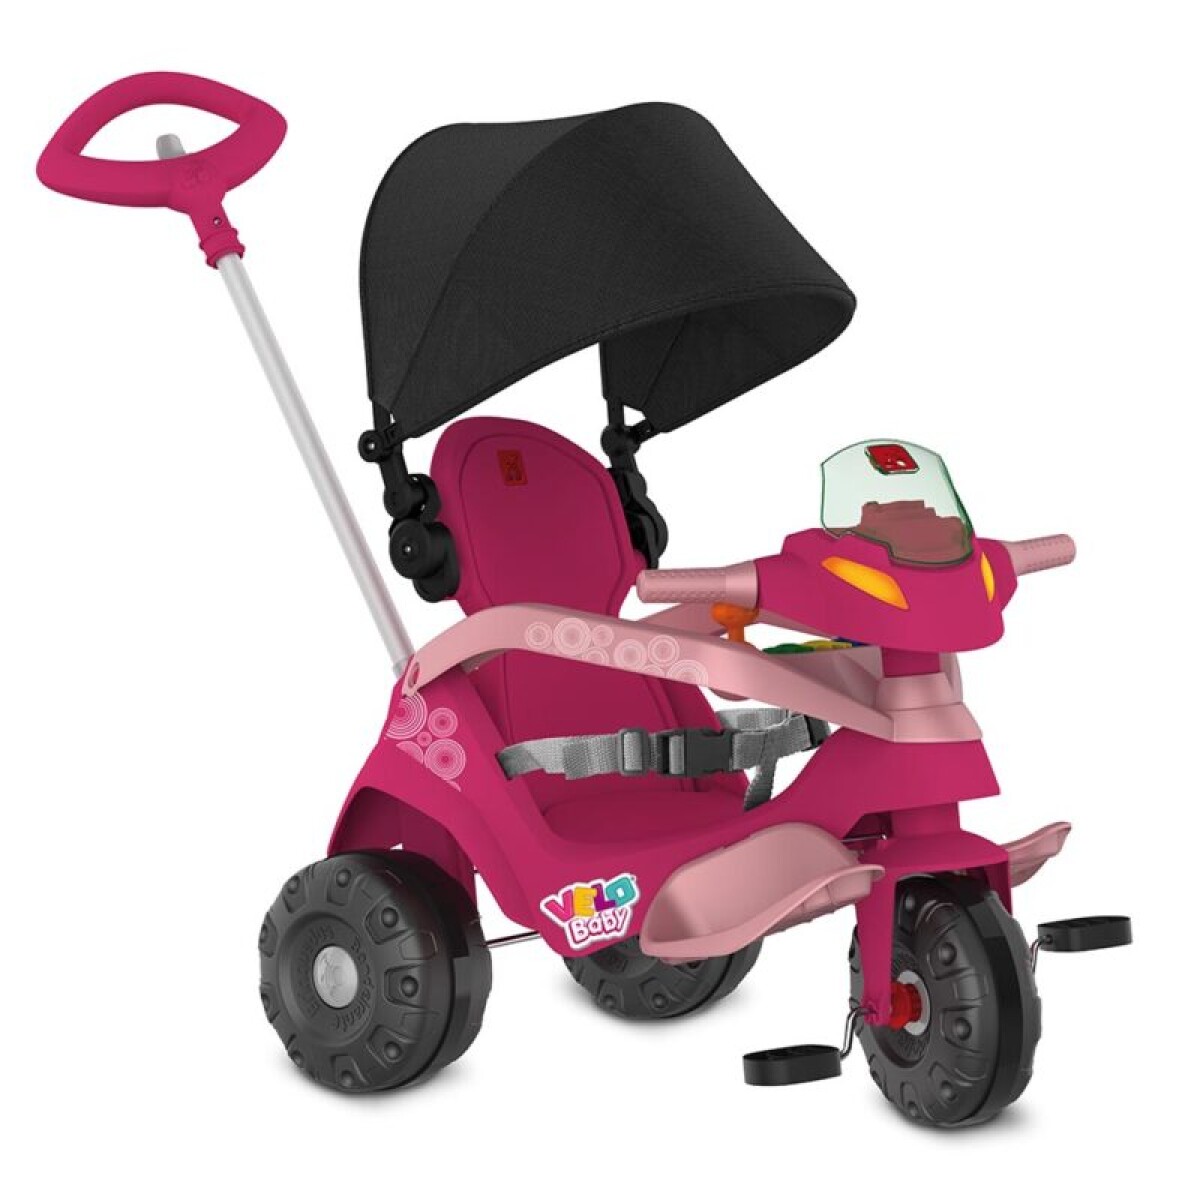 Triciclo Bandeirante Velobaby Reclinable Paseo Pedal Rosa 359 